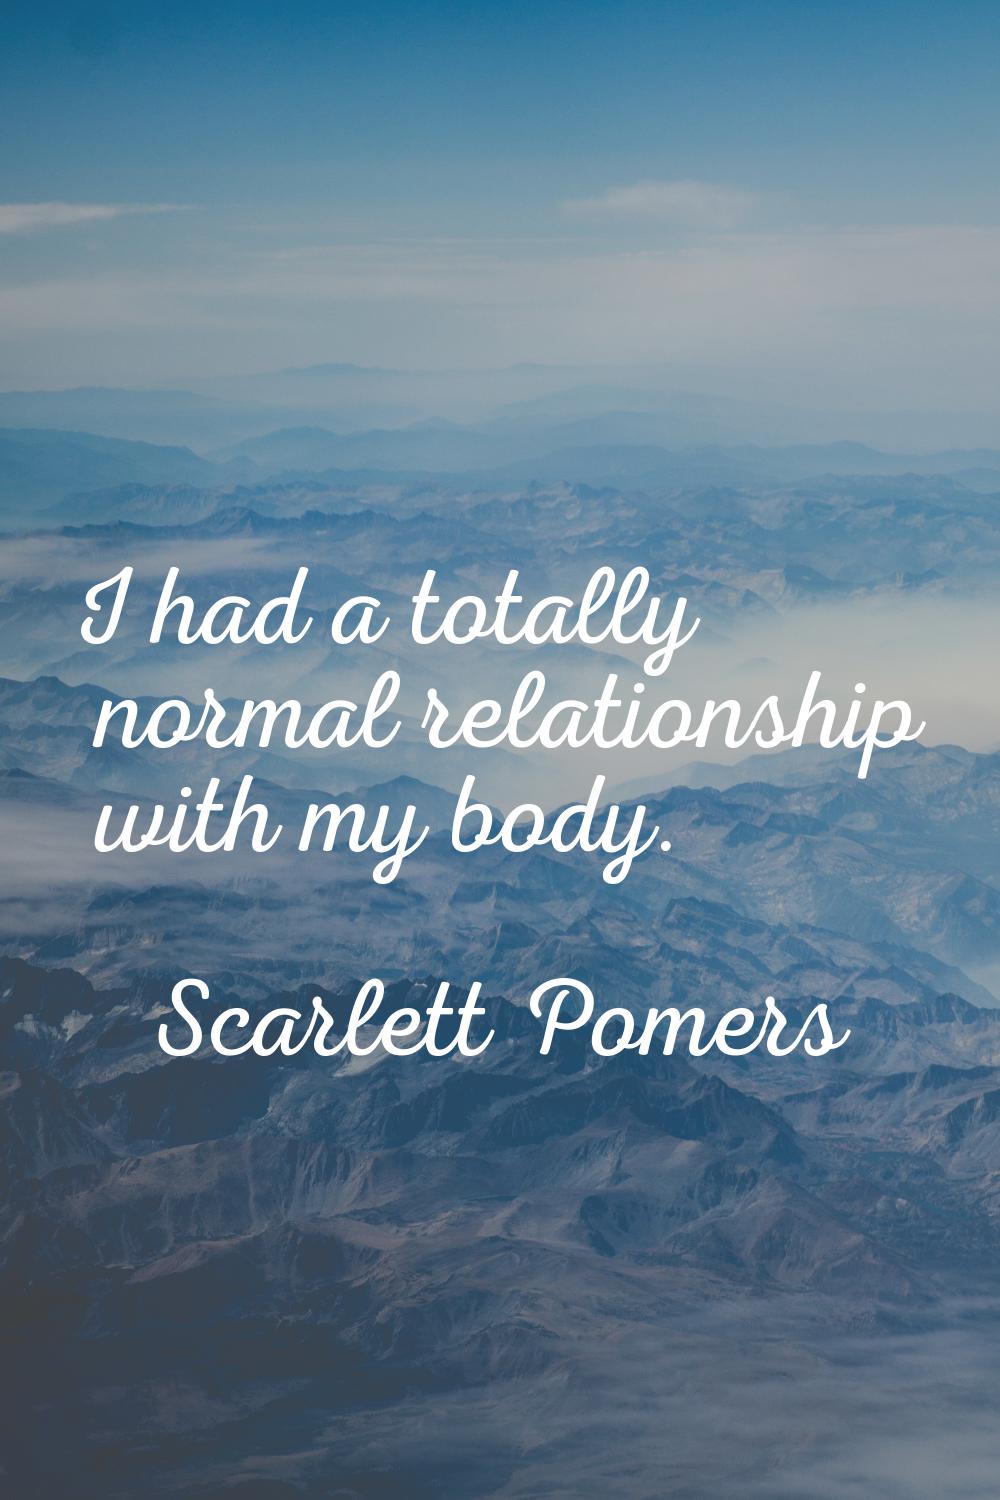 I had a totally normal relationship with my body.